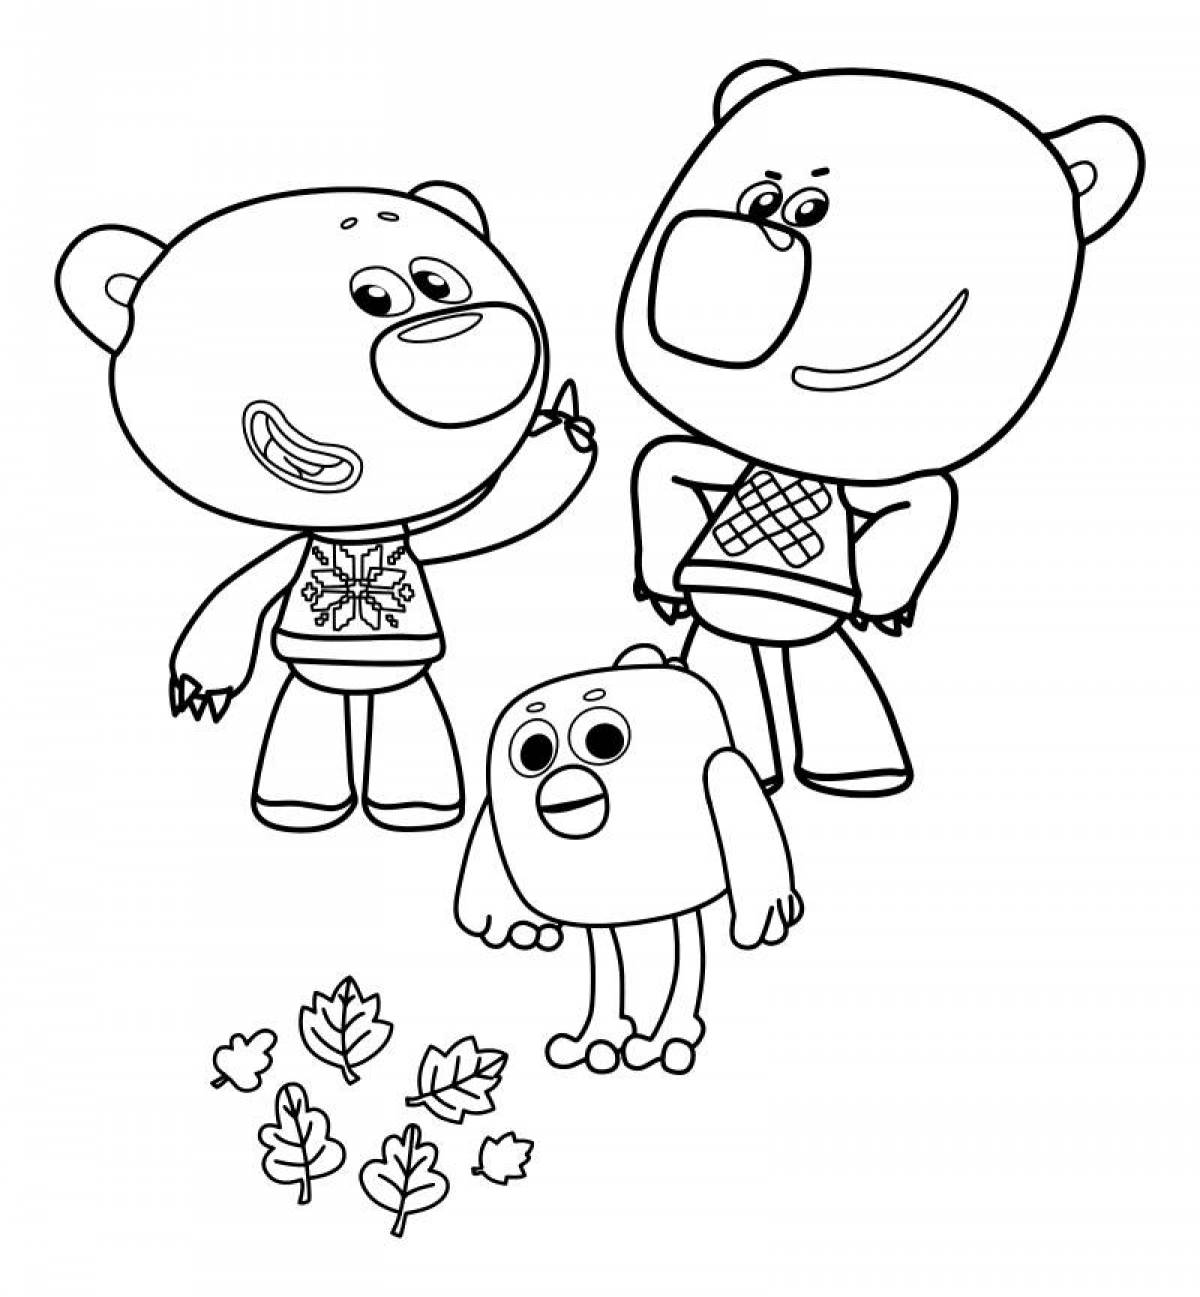 Funny bear coloring pages